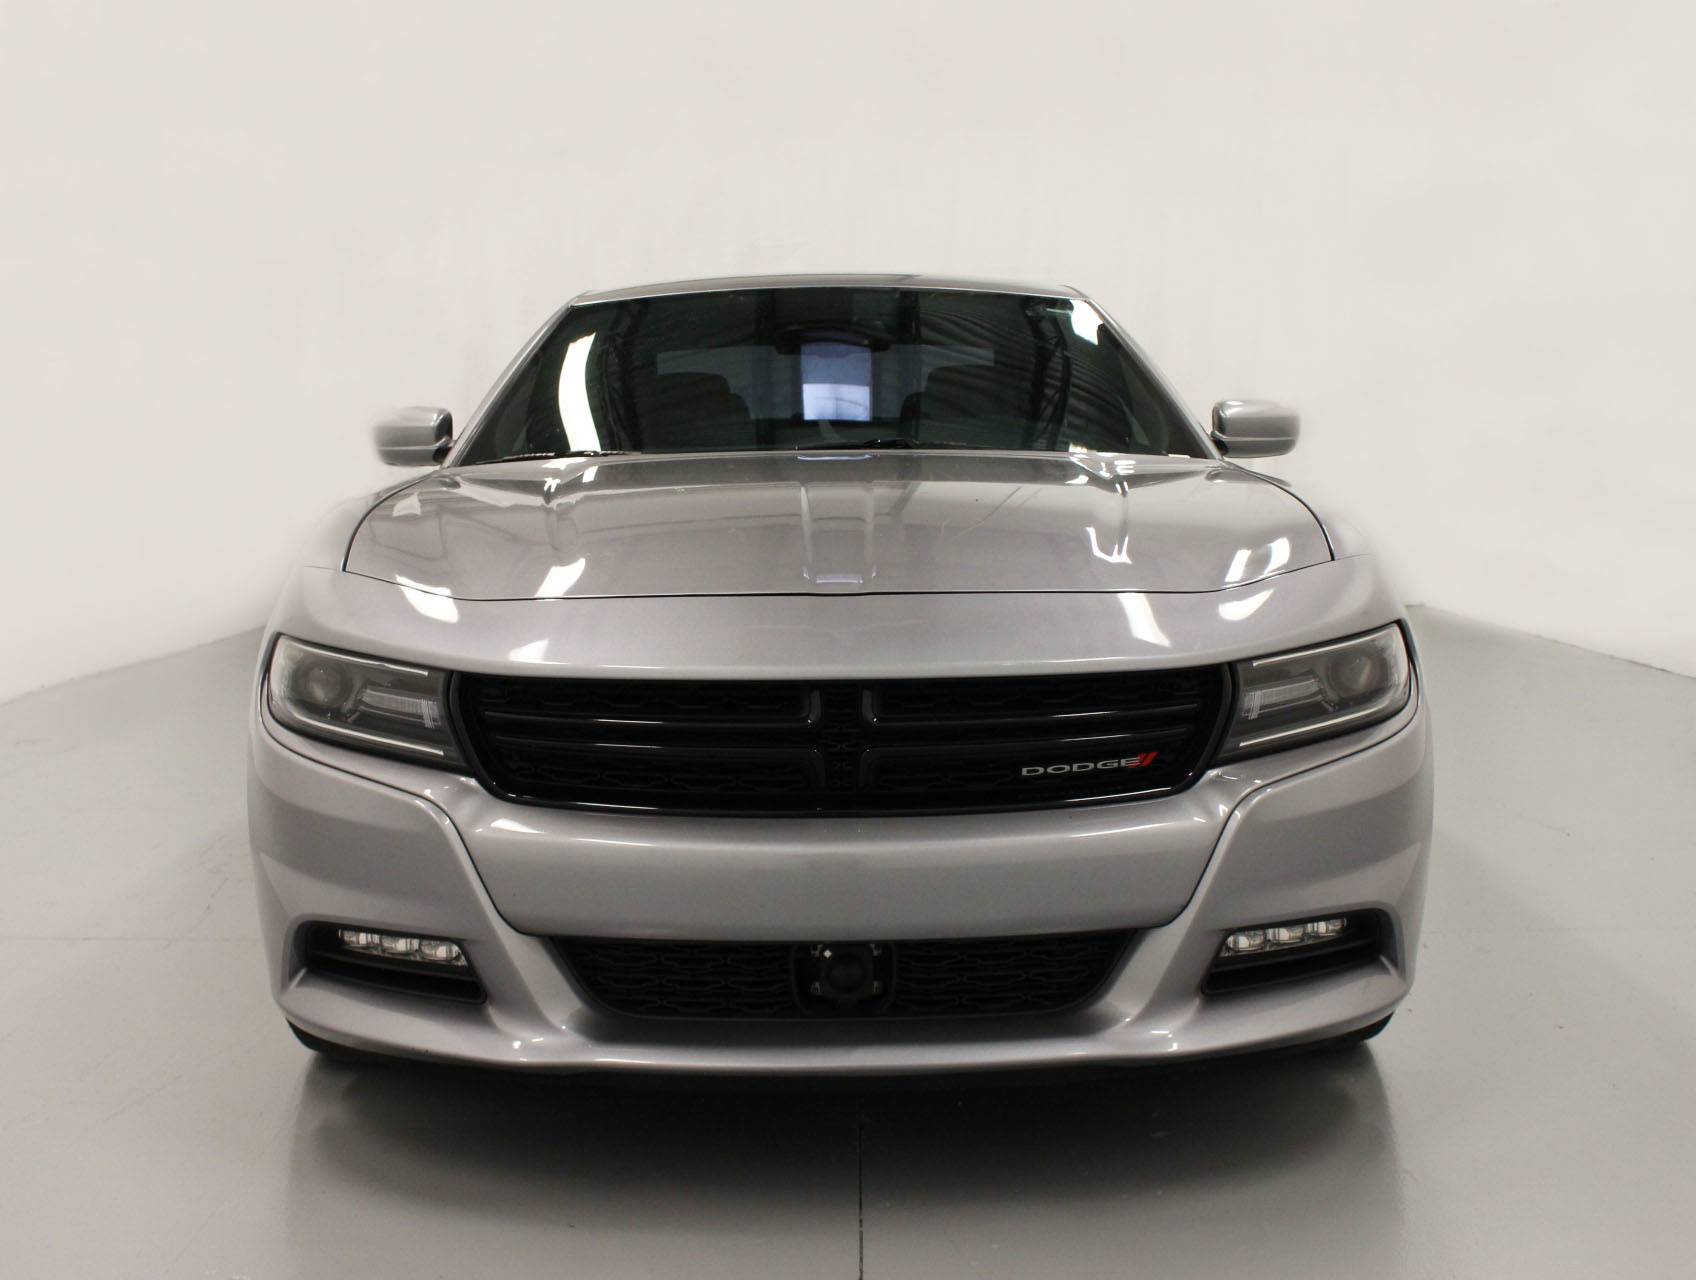 Florida Fine Cars - Used DODGE CHARGER 2015 MIAMI SXT